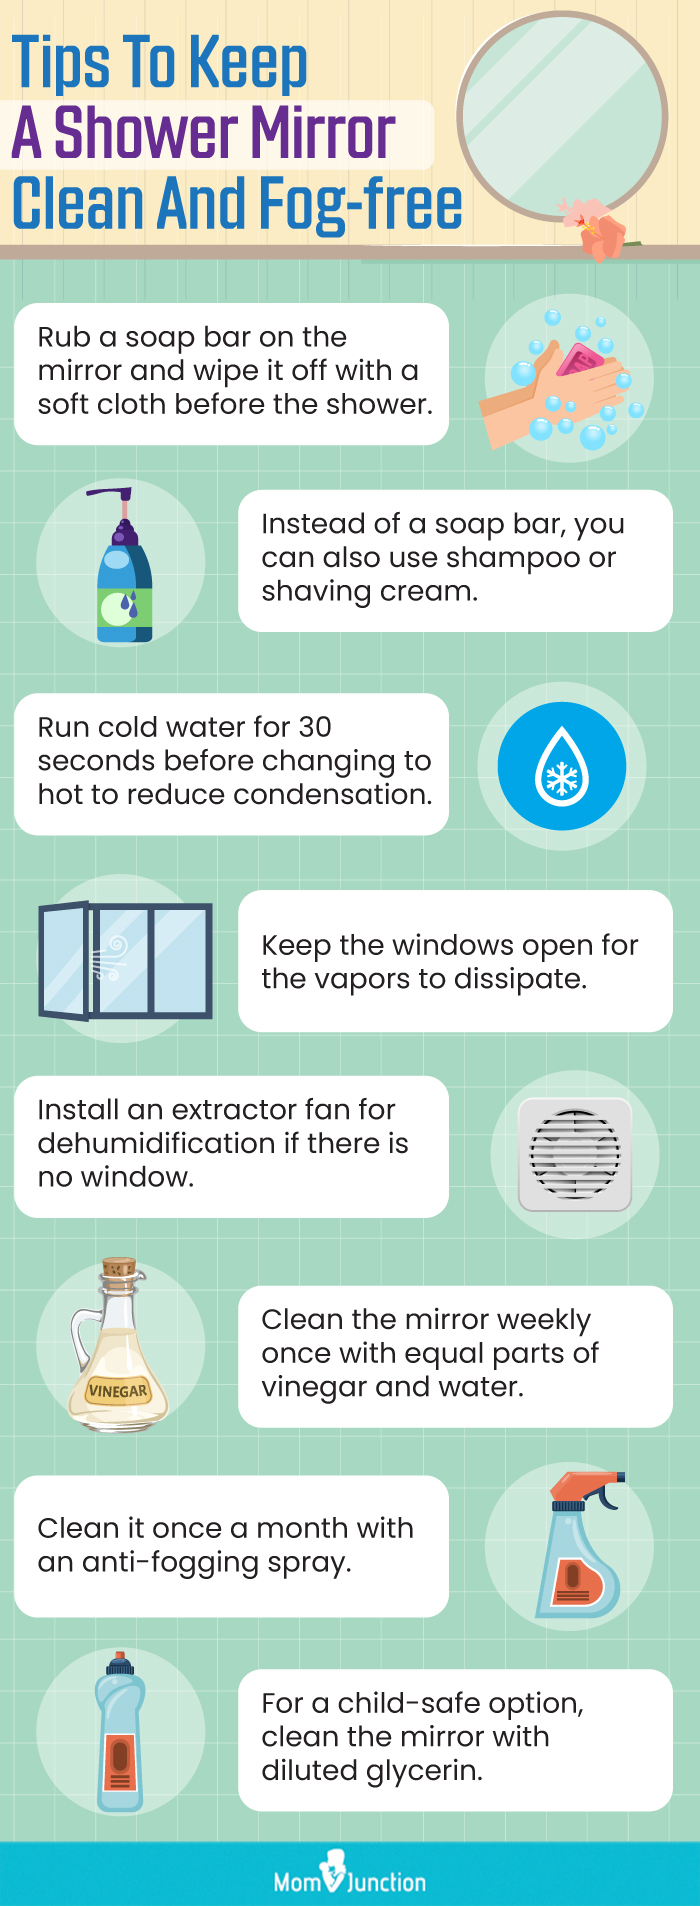 Tips To Keep A Shower Mirror Clean And Fog free (infographic)